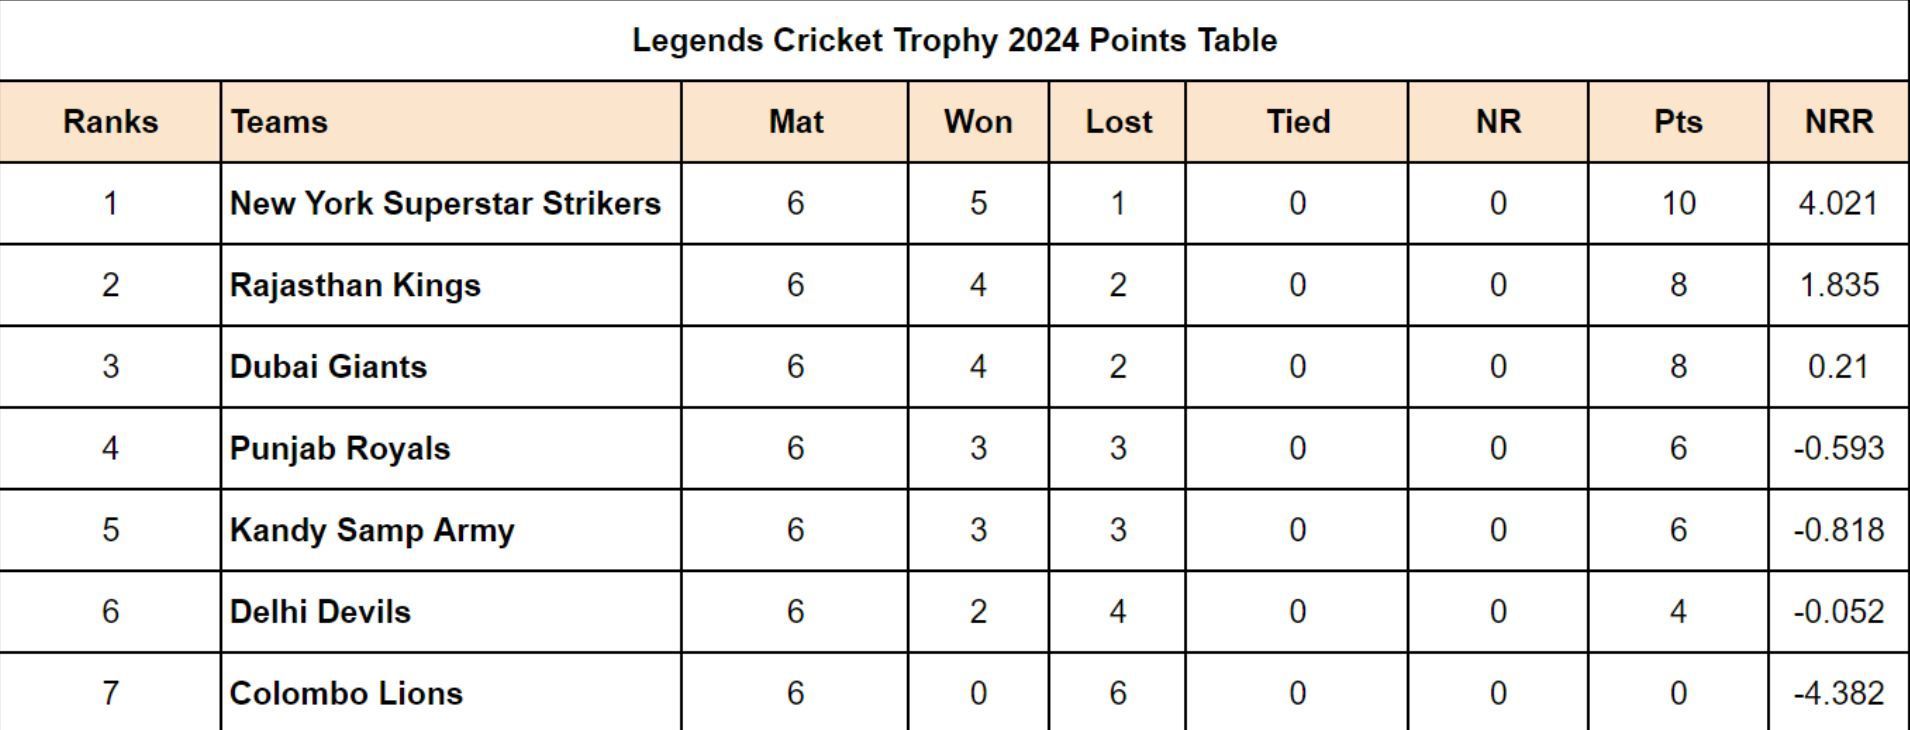 Legends Cricket Trophy 2024 Points Table Updated after Match 21